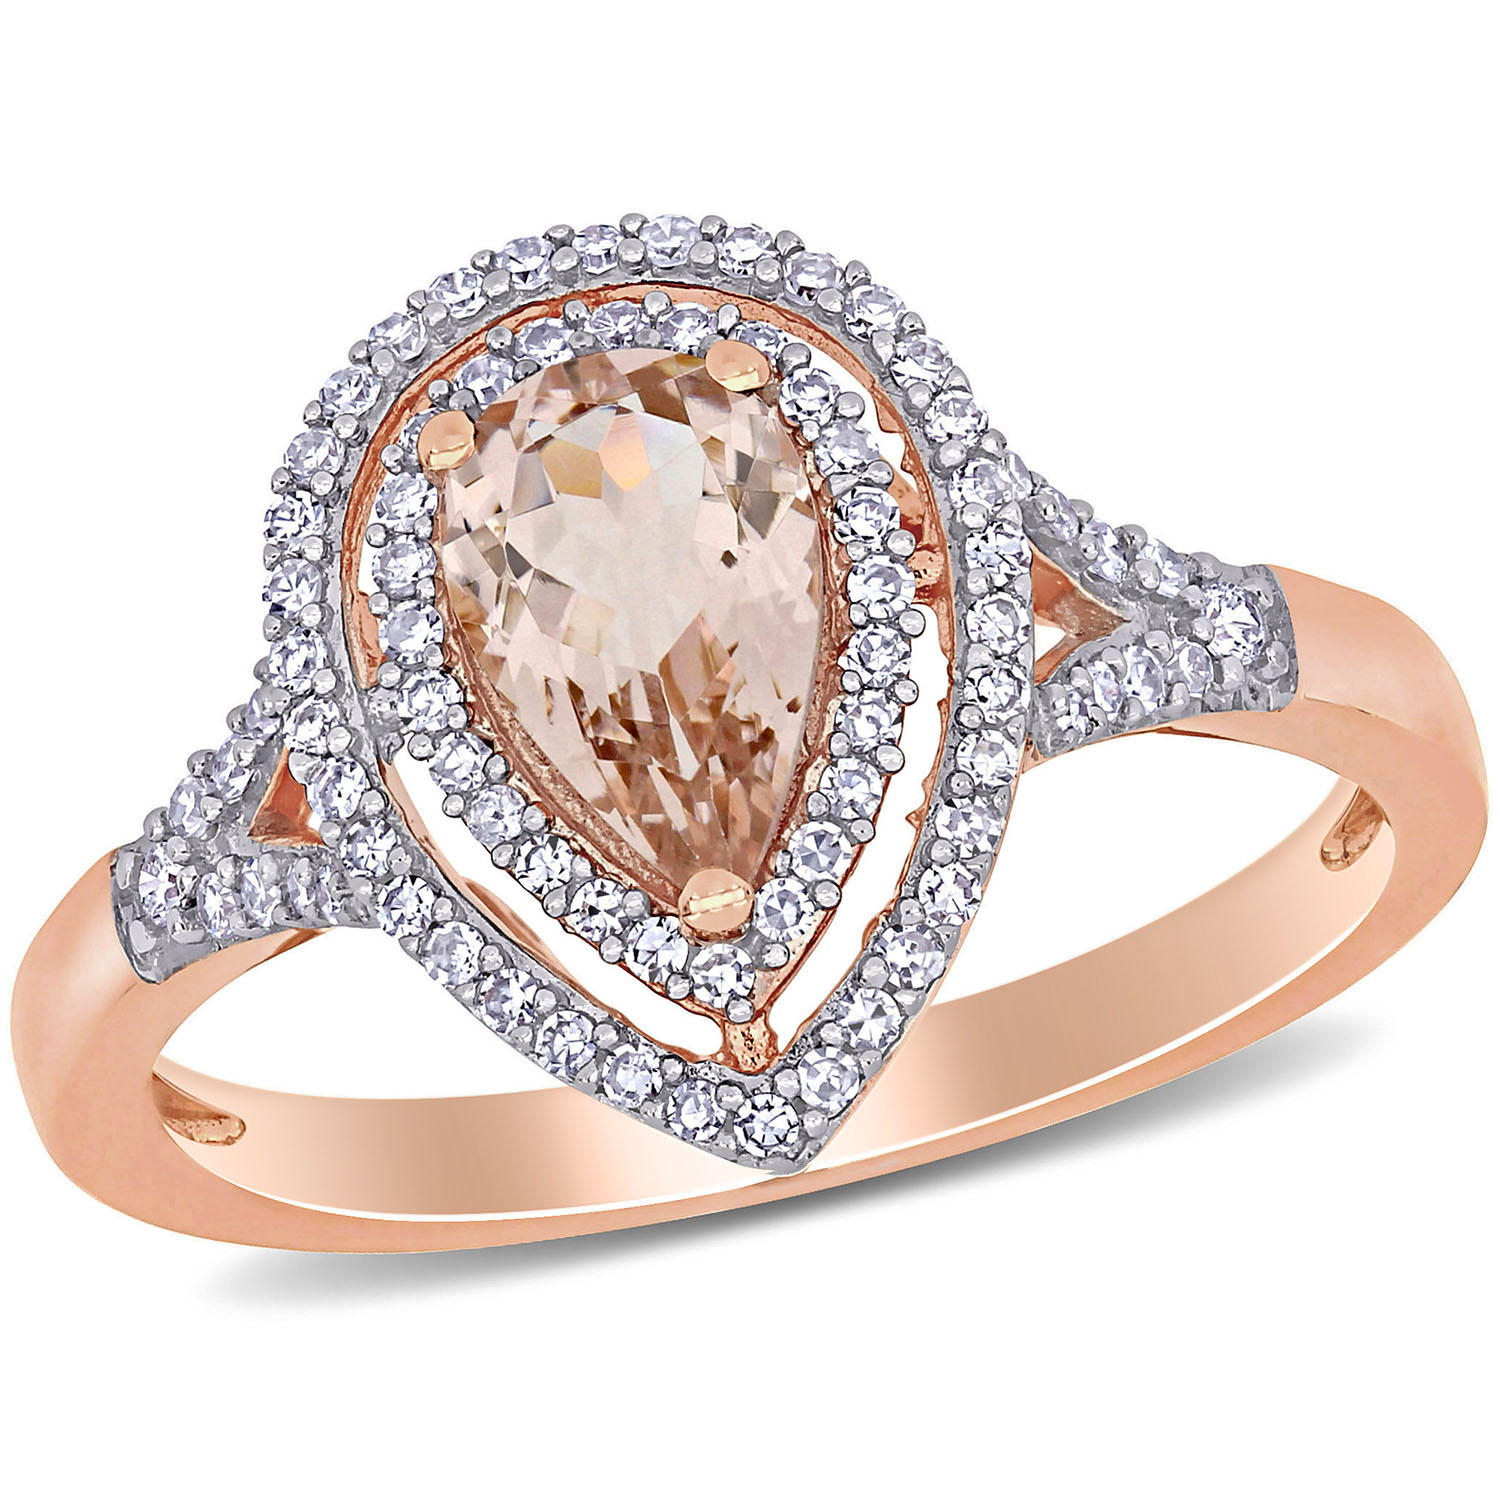 0.67 CT. T.G.W. Morganite and 0.25 CT. T.W. Diamond Double Halo Engagement Ring in 14k Rose Gold 8